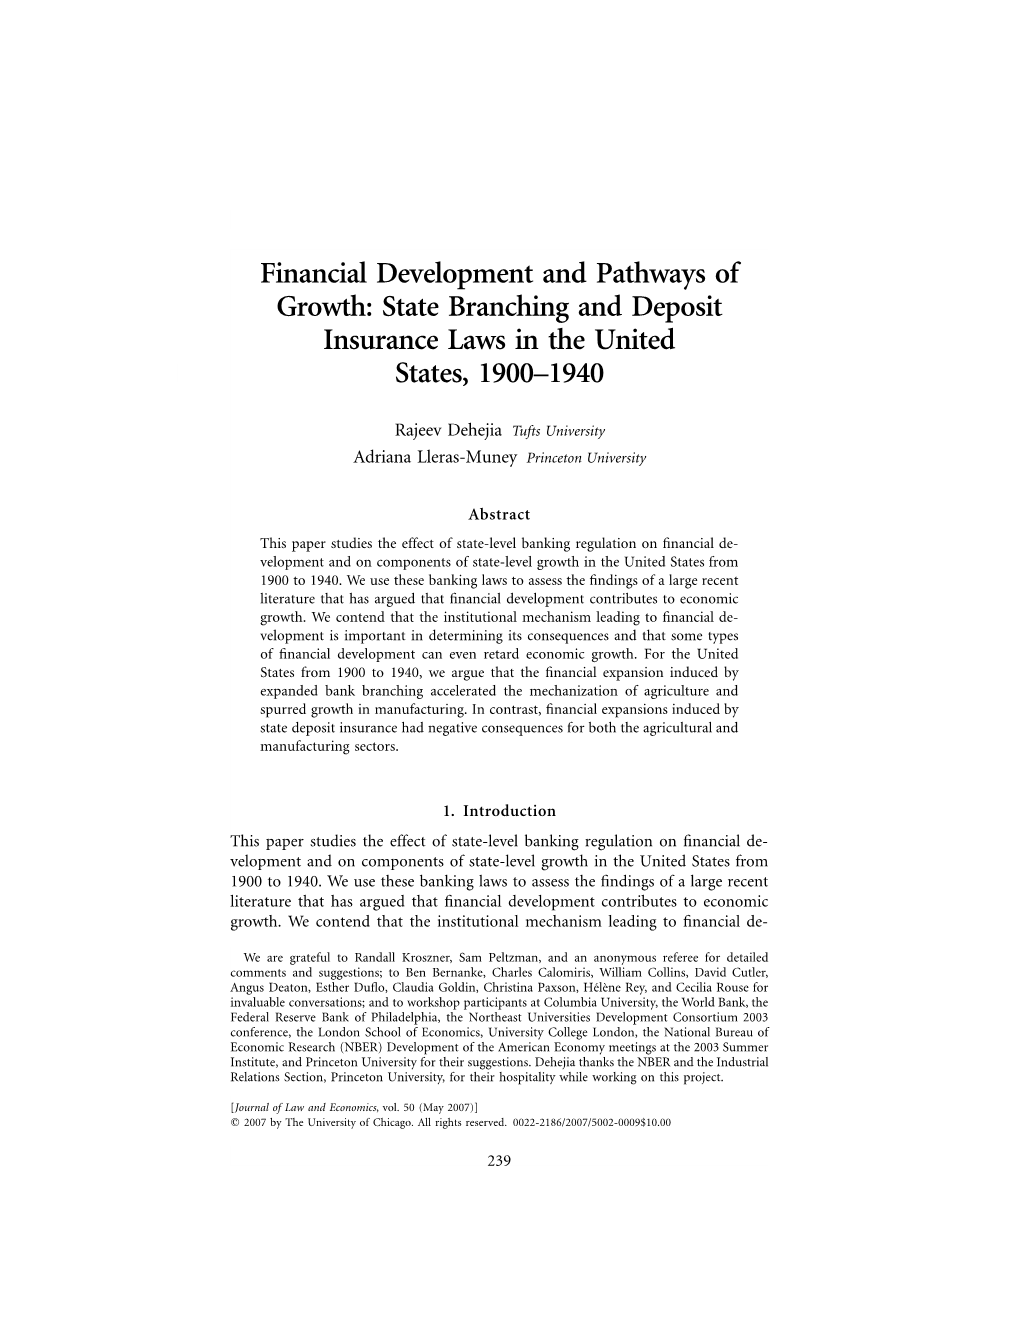 State Branching and Deposit Insurance Laws in the United States, 1900–1940